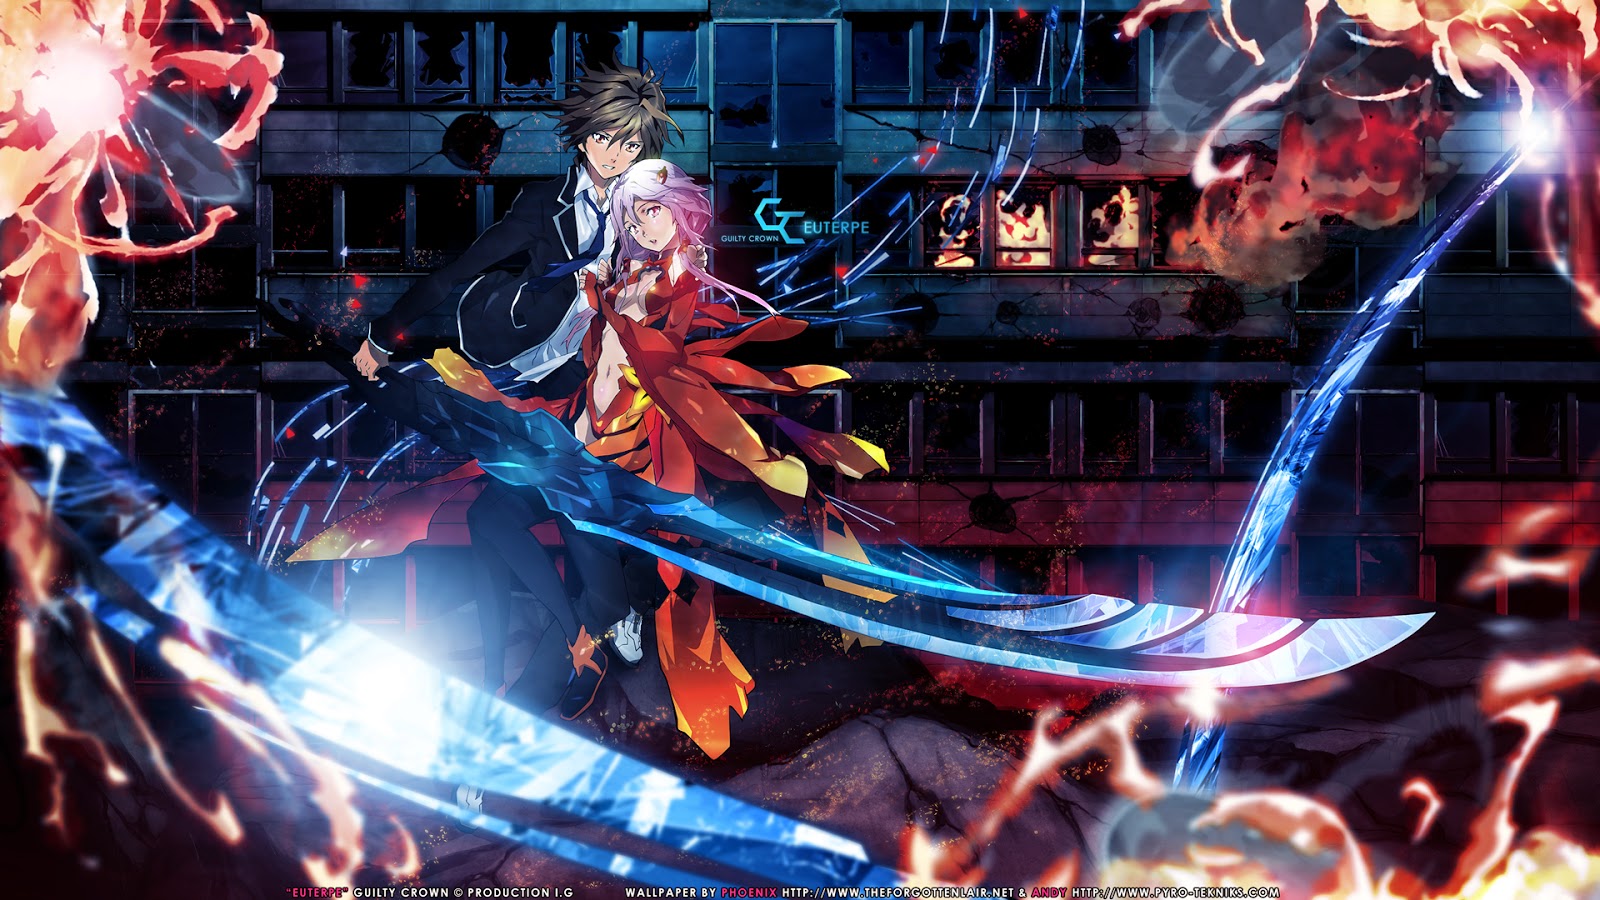 Guilty Crown - 19 - Lost in Anime